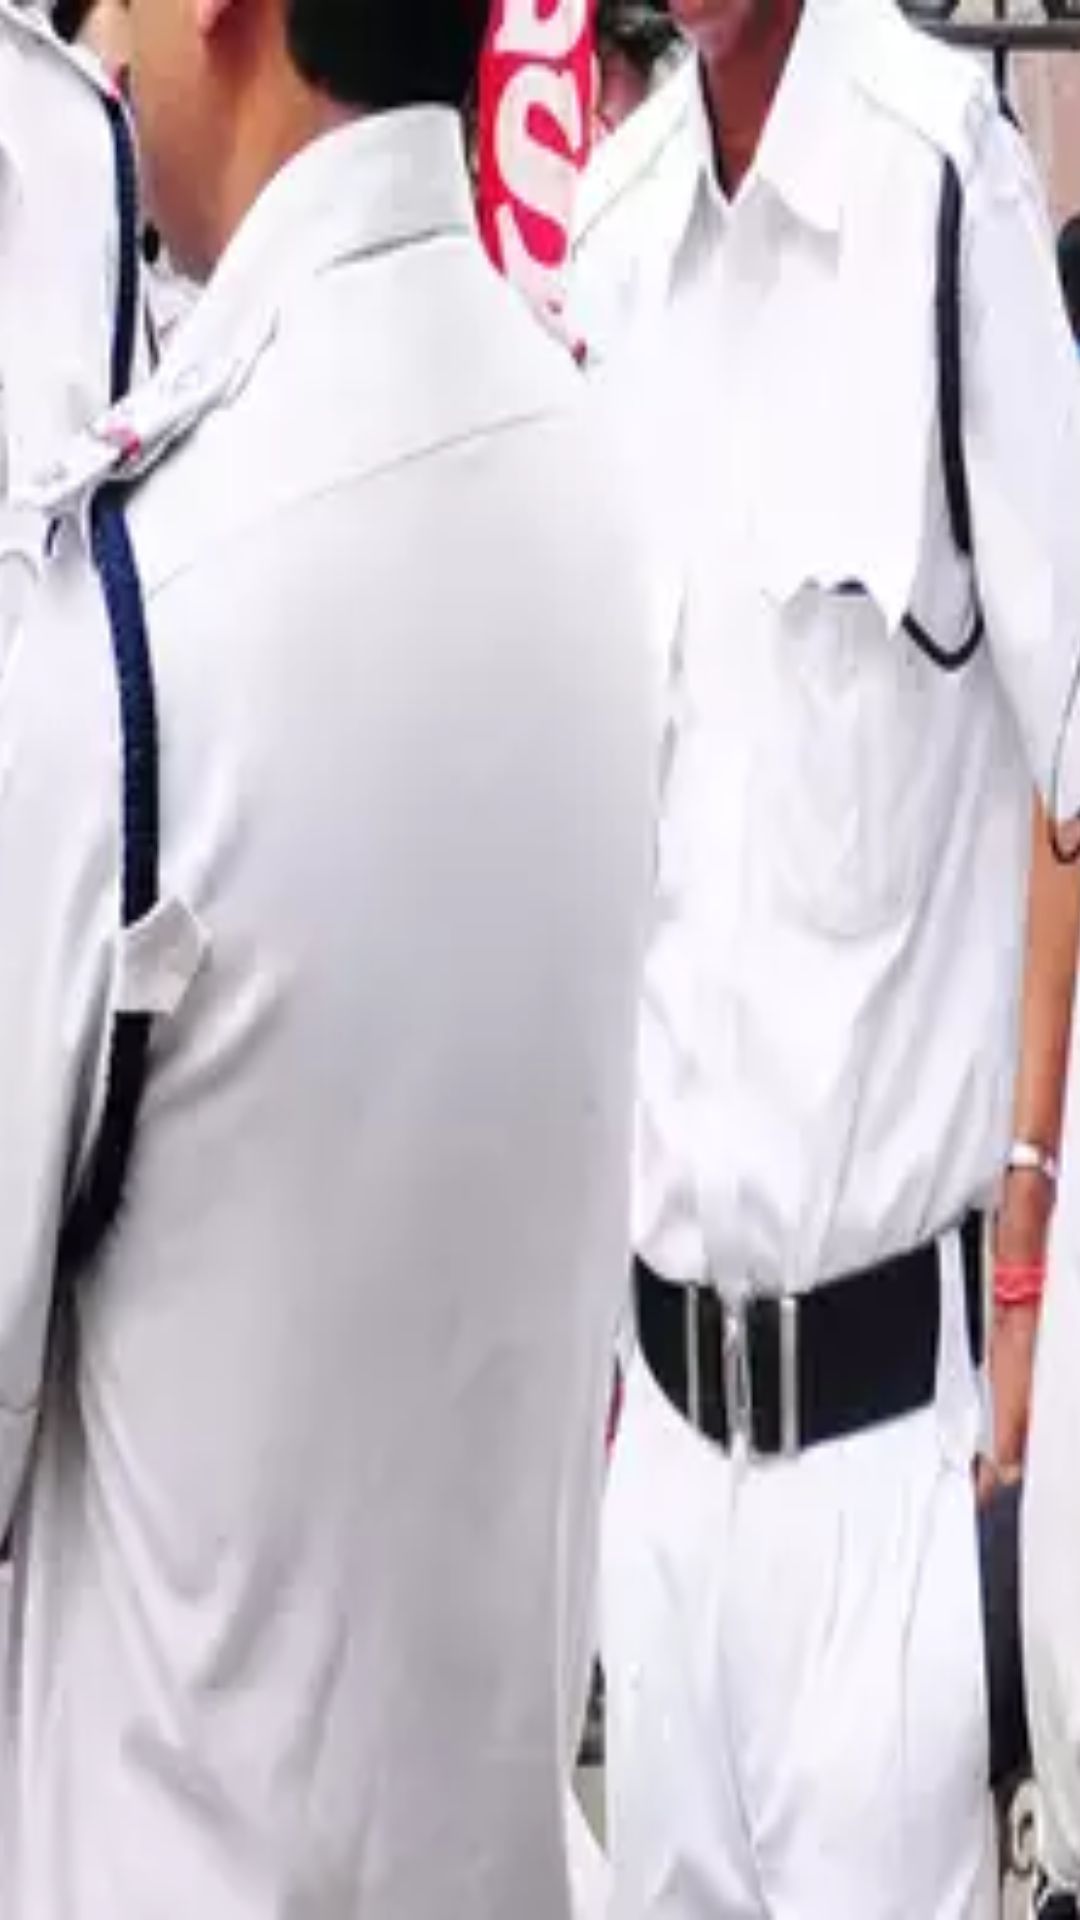 Why does West Bengal Police wear only white uniforms?